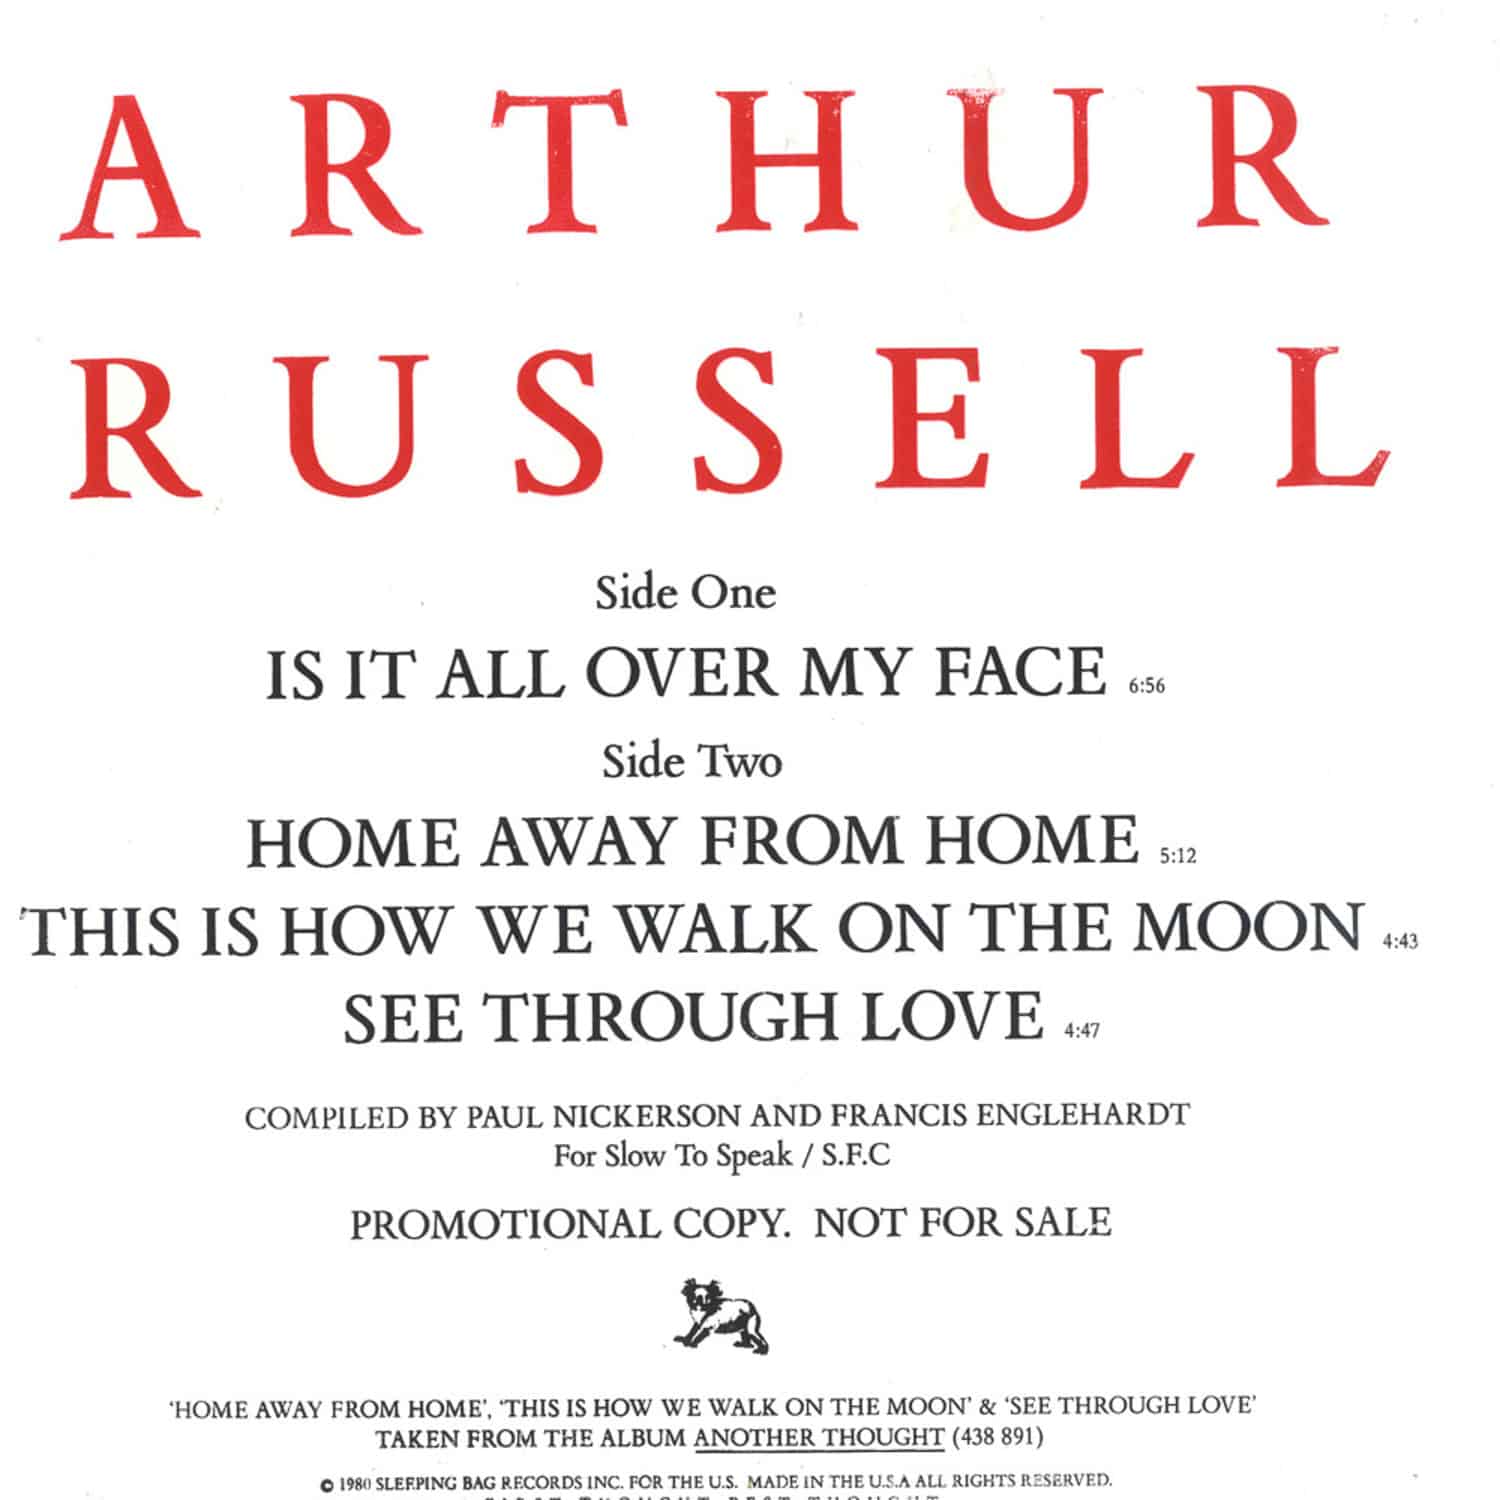 Arthur Russell - IS IT ALL OVER MY FACE